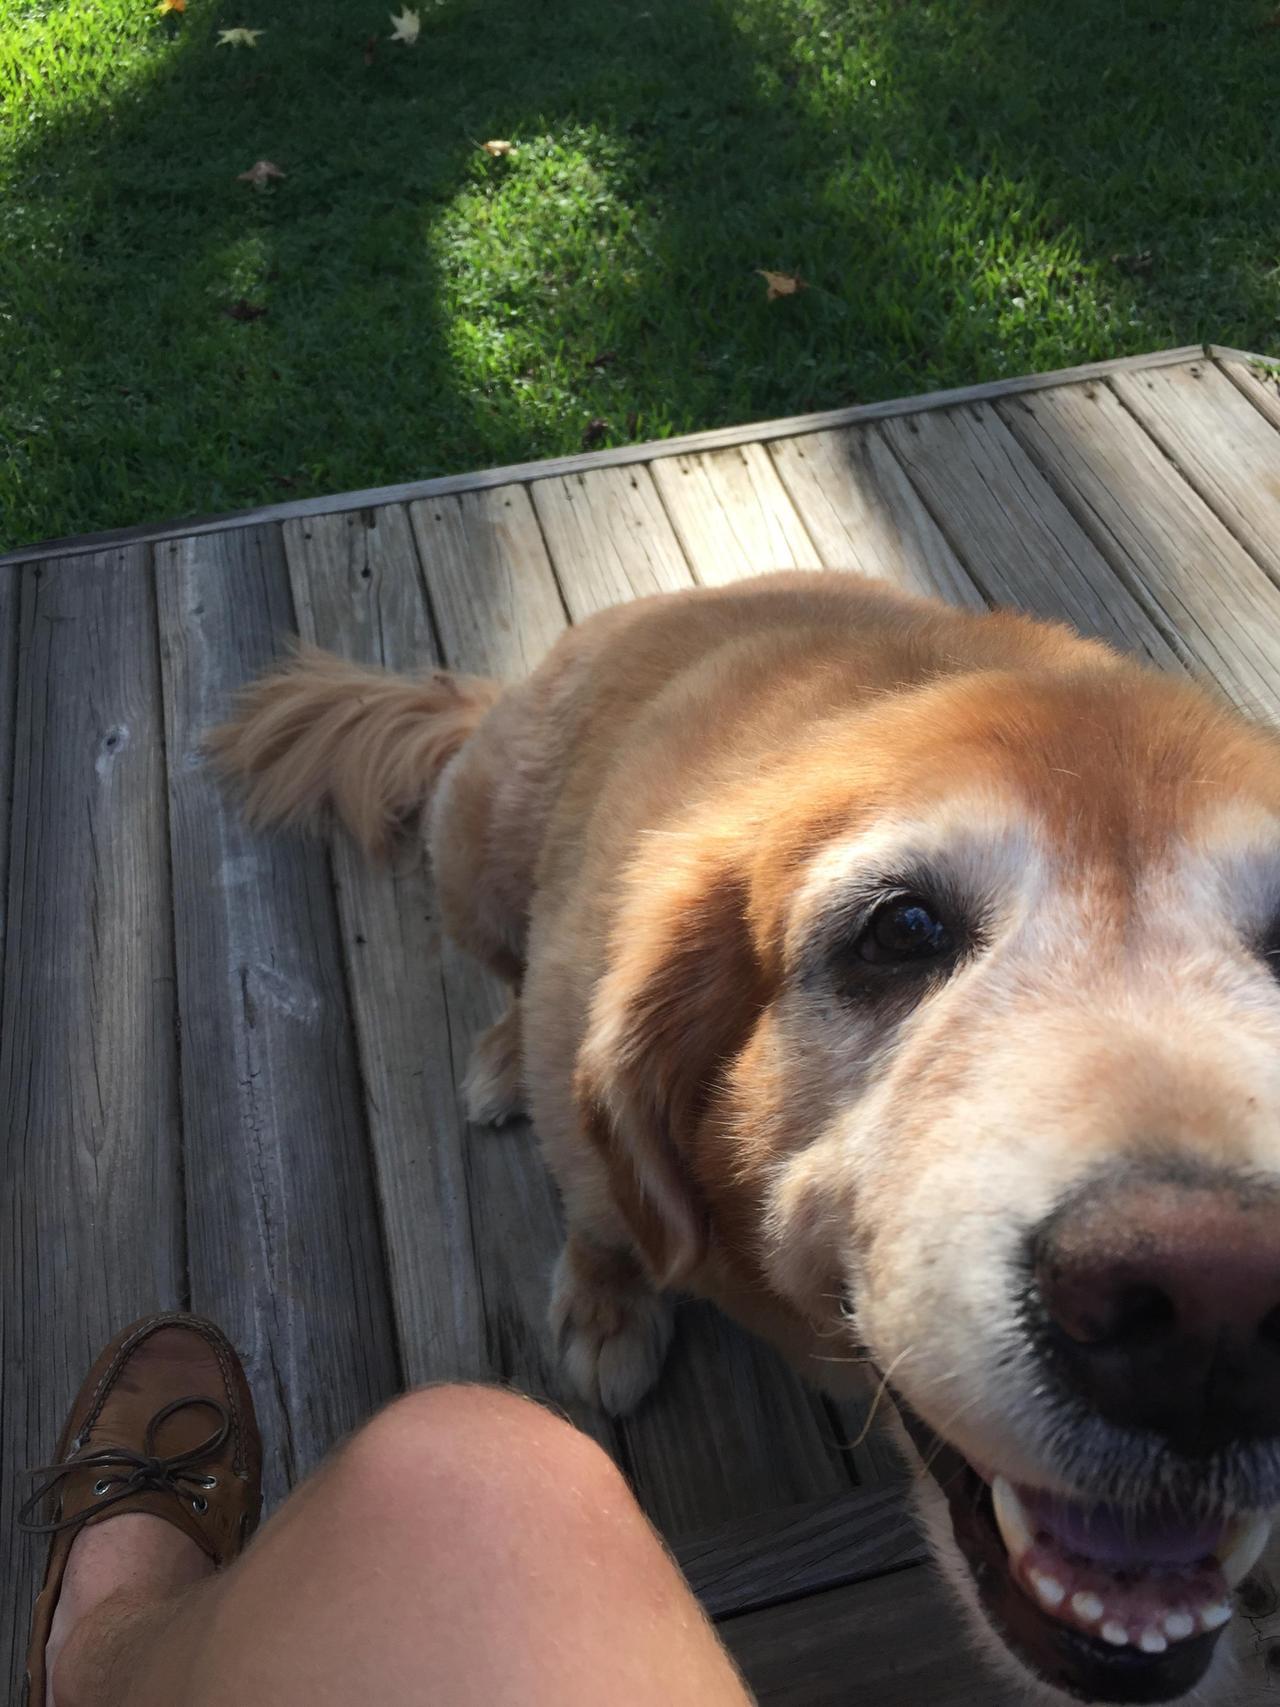 awwww-cute:  He’s an old man ya, but he’s the cutest old man anyone could ask